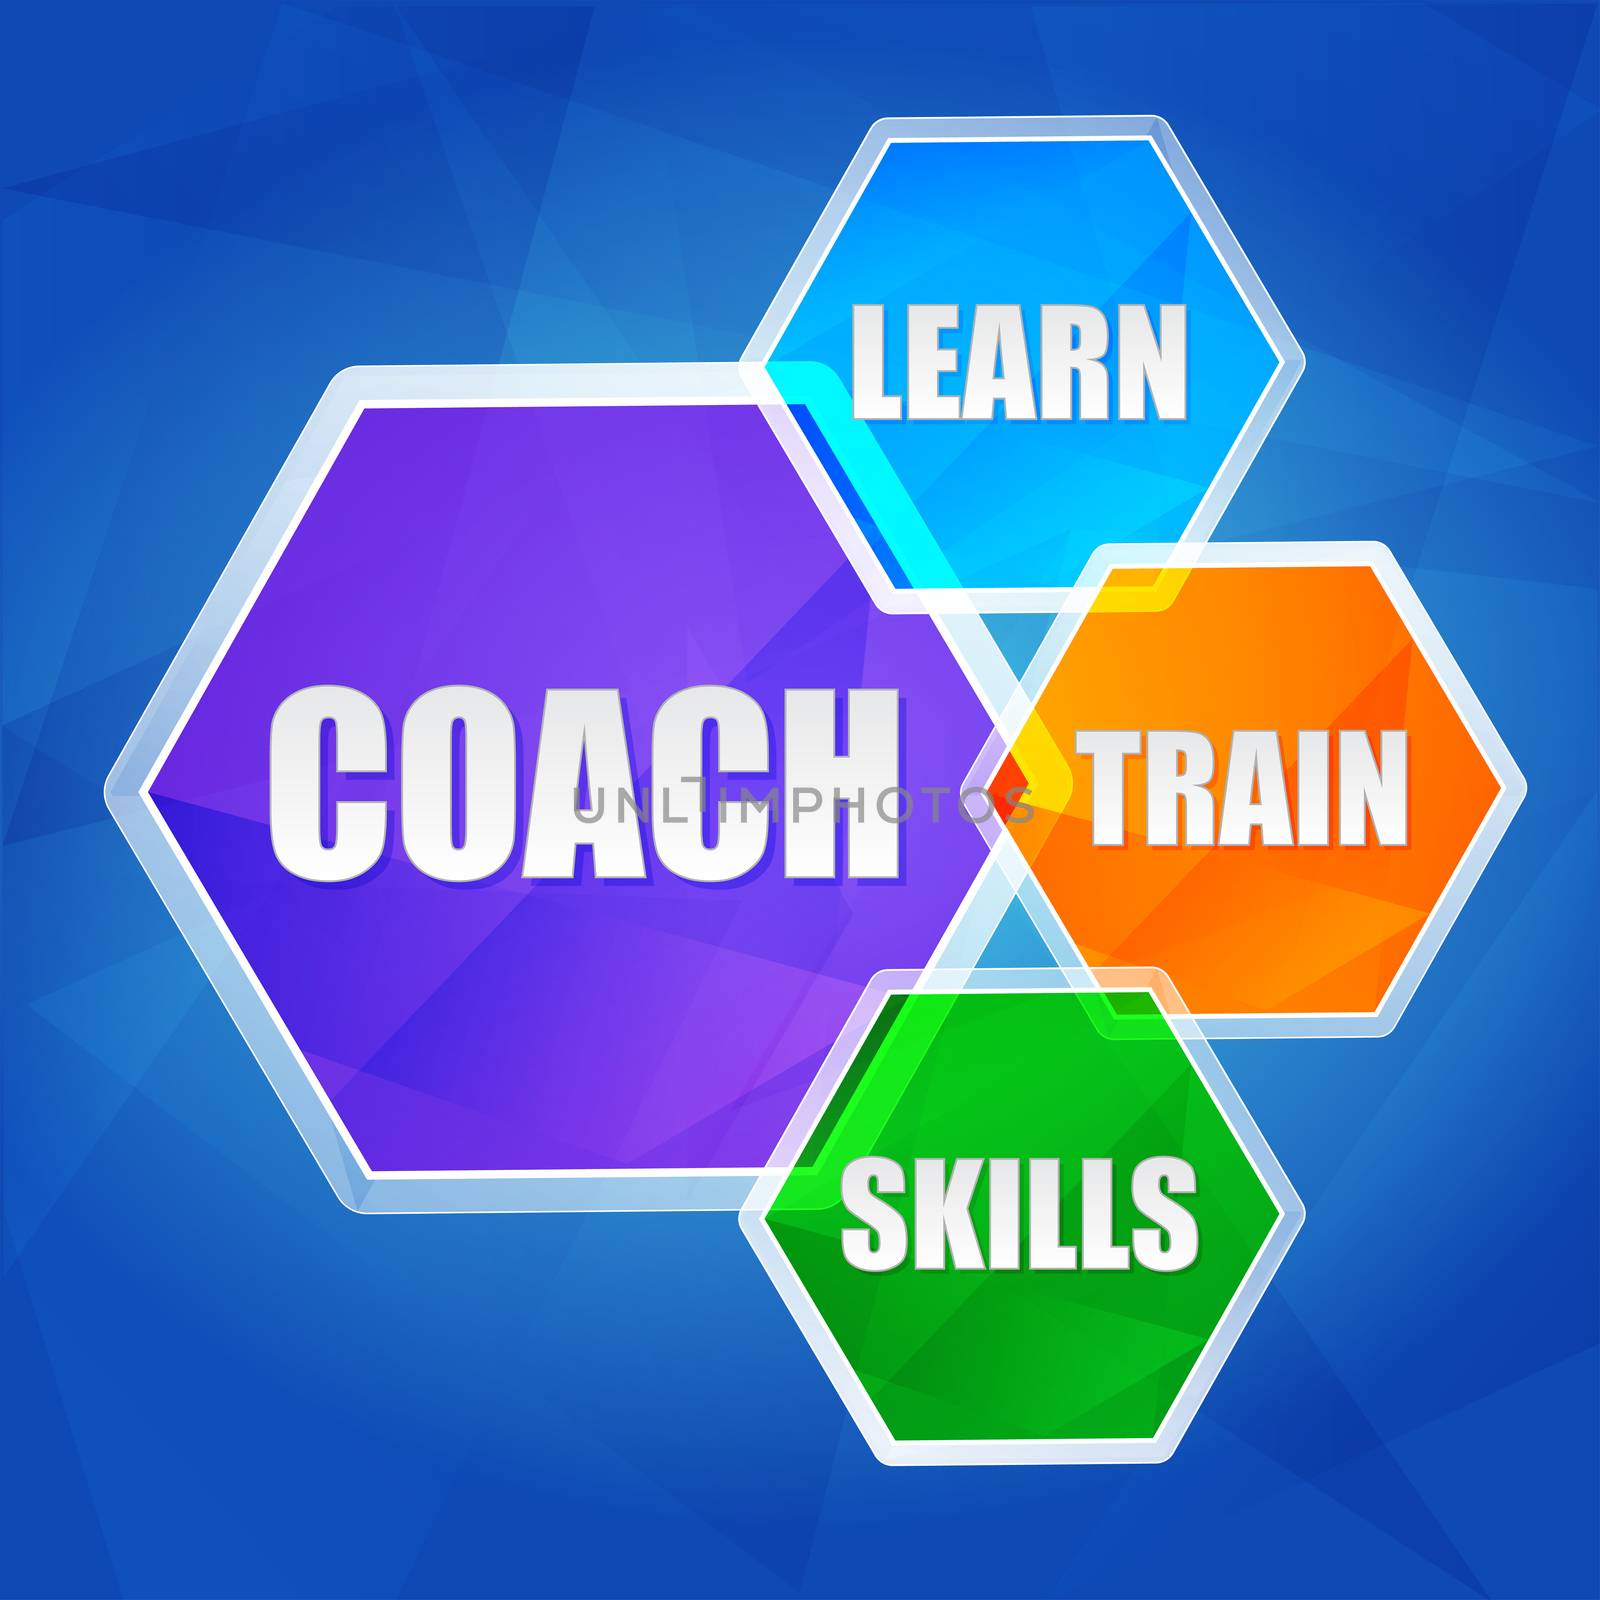 coach, learn, train, skills - business education motivation concept words in color hexagons over blue background, flat design